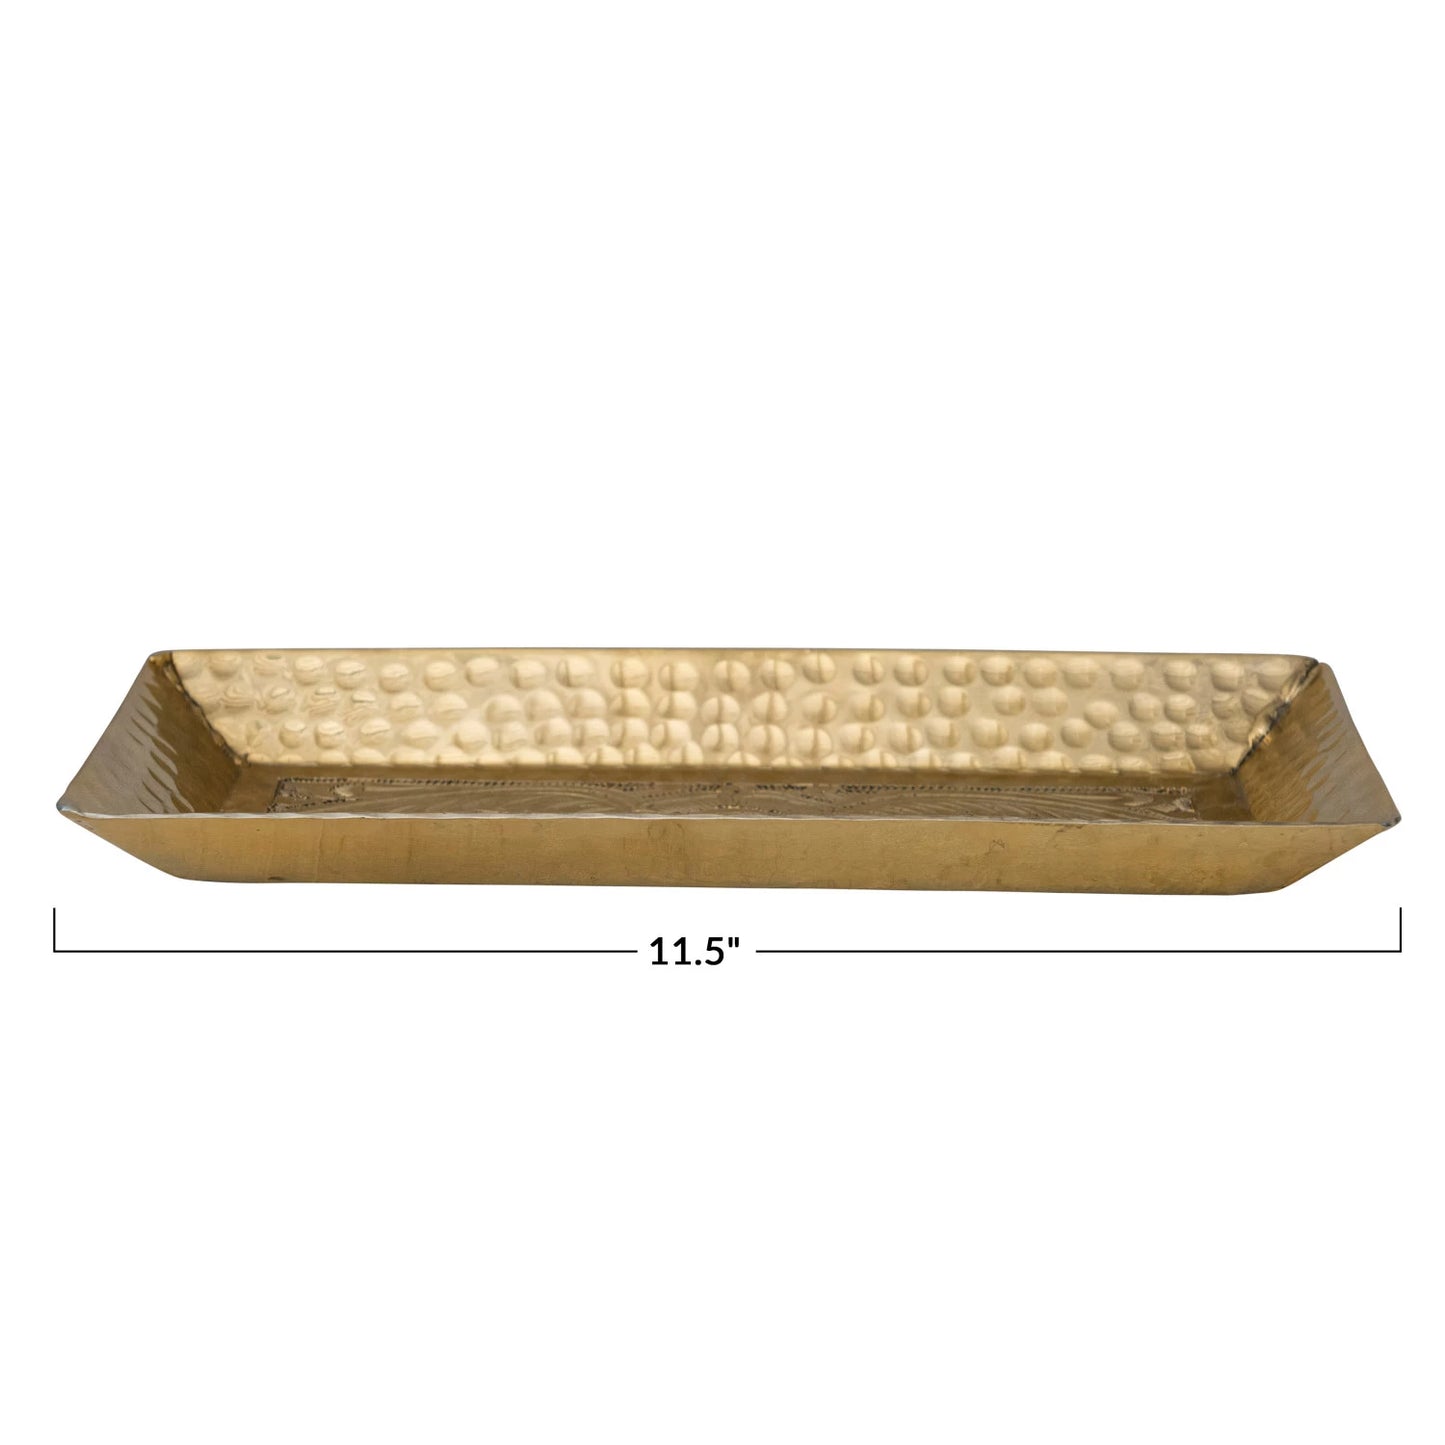 Decorative Hammered Aluminum Tray w/ Stamped Design, Gold Finish